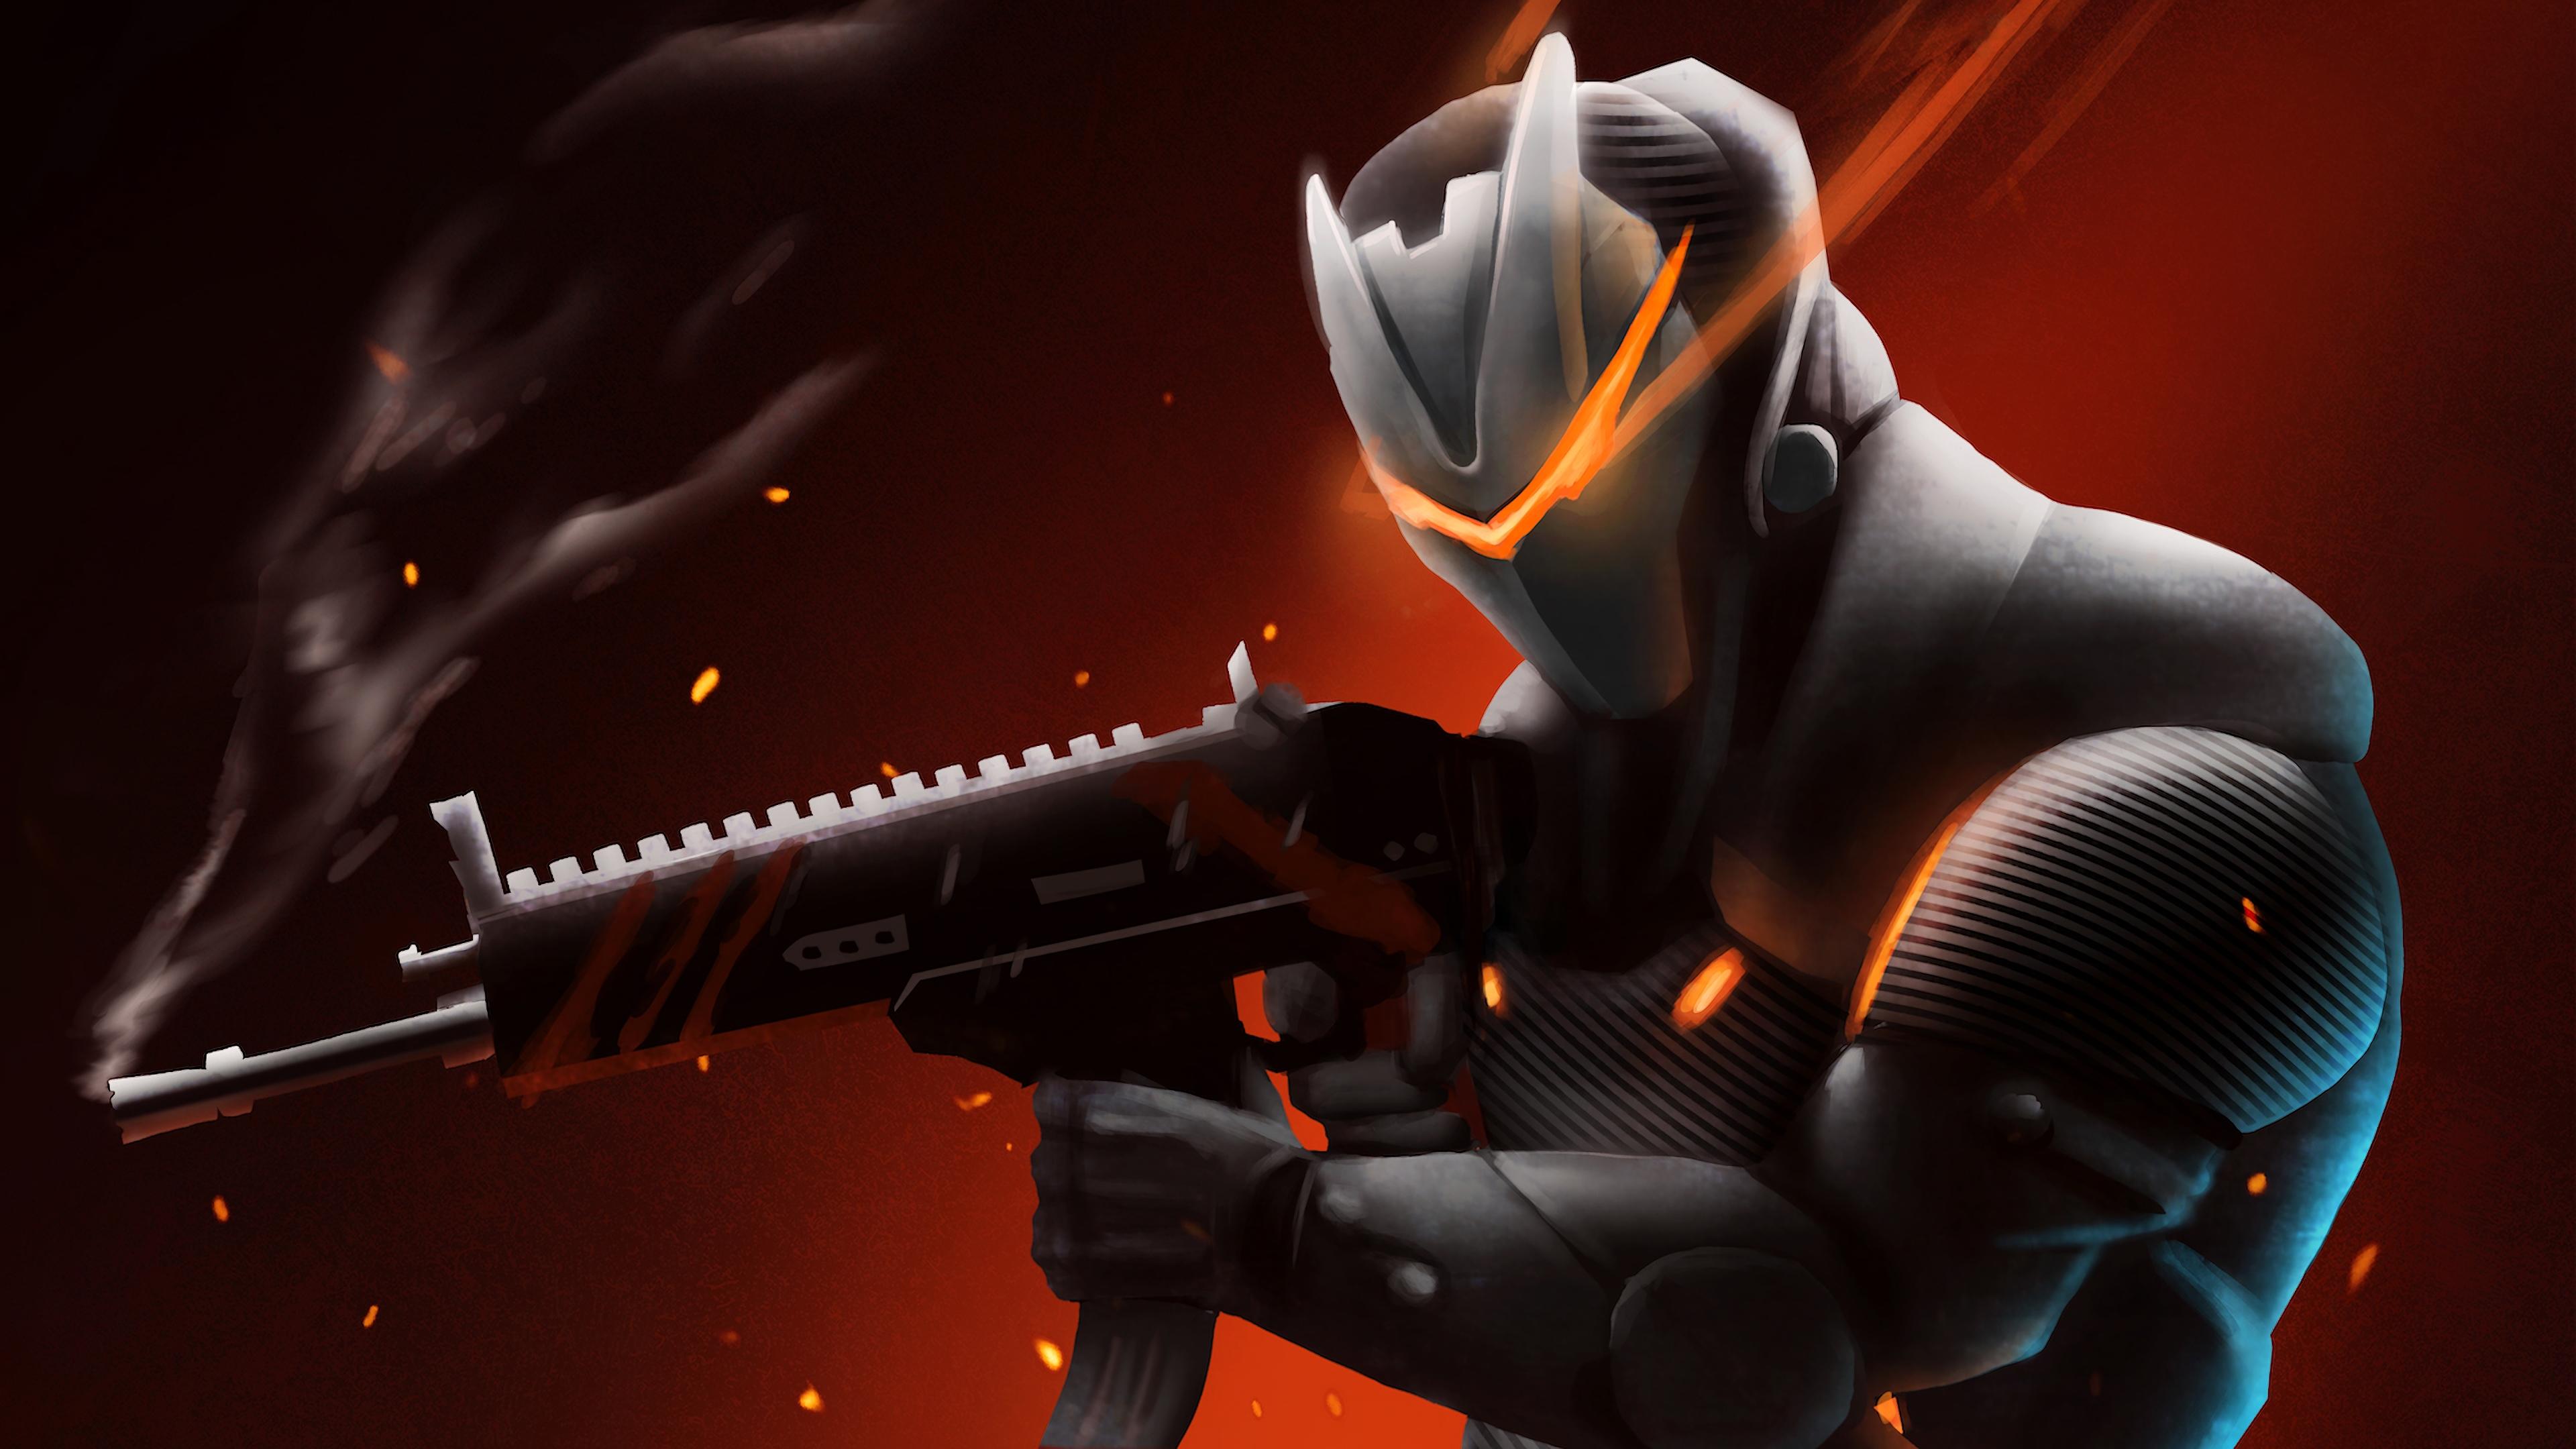 3840 x 2160 · jpeg - Omega With Rifle Fortnite Battle Royale, HD Games, 4k Wallpapers ...